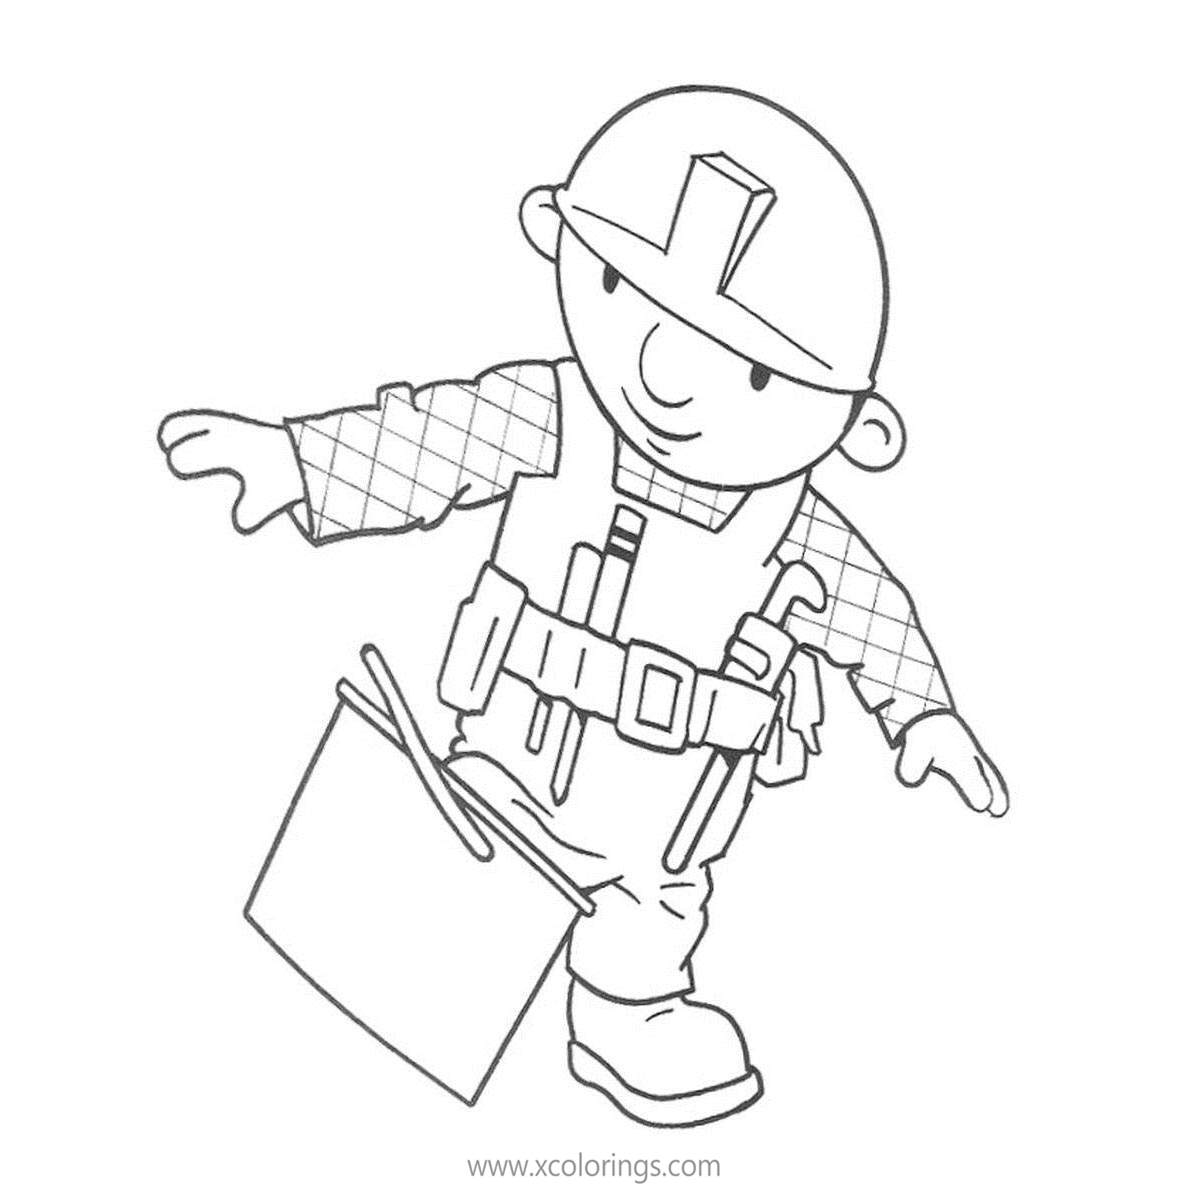 Free Bob the Builder Coloring Pages Bob and Bucket printable